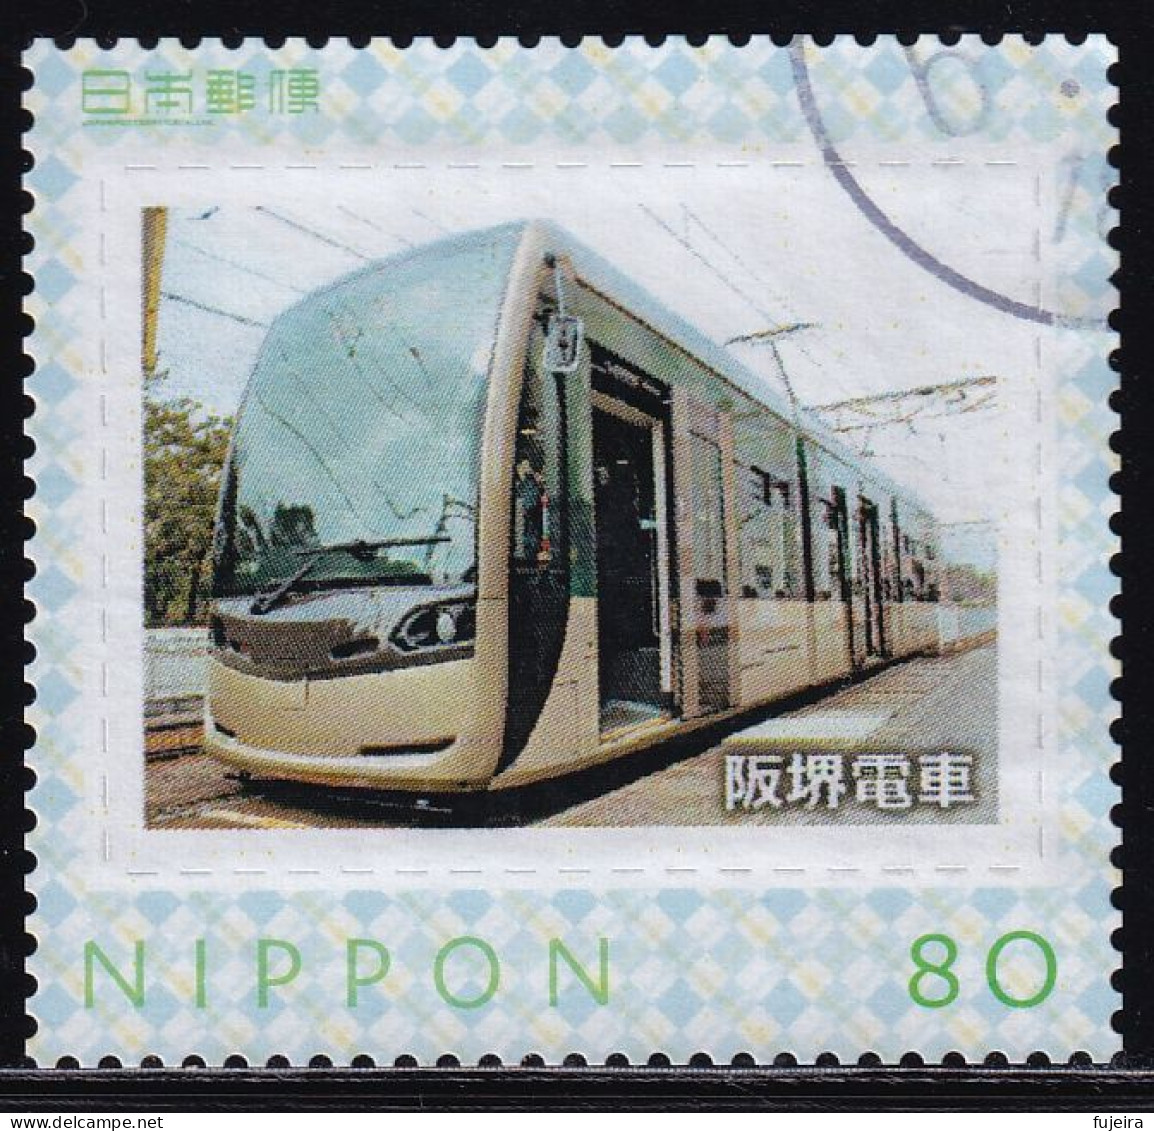 Japan Personalized Stamp, Tram (jpv9619) Used - Used Stamps